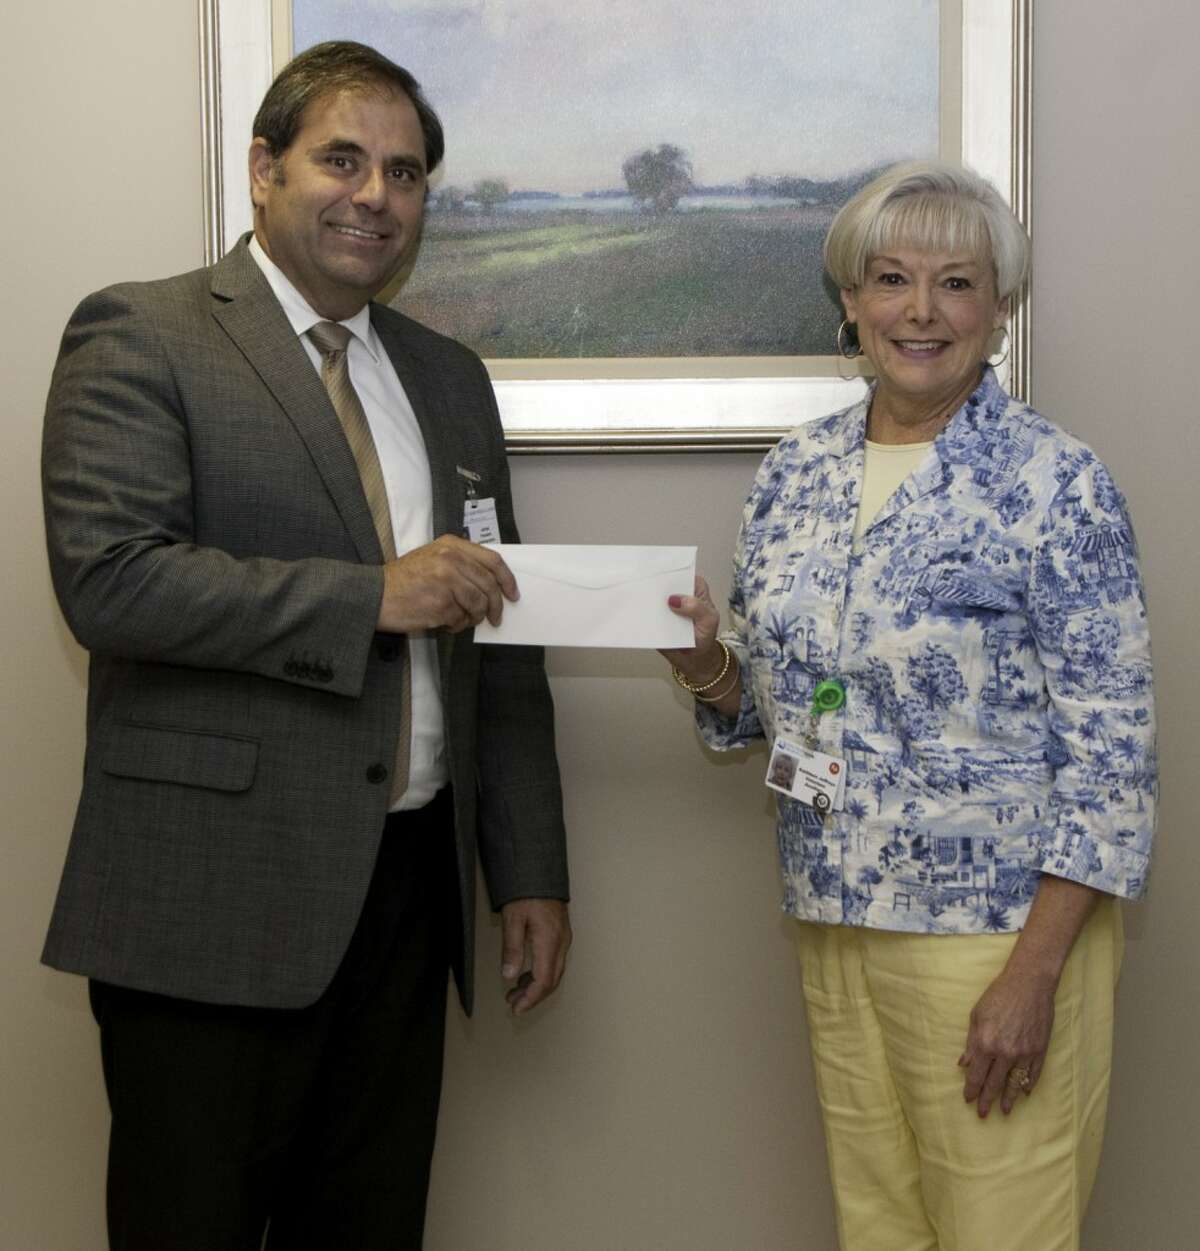 West Shore Medical Center Auxiliary president Kathleen Jeffreys presents West Shore Medical Center president James Barker with a check for $10,000, which is the first installment on the volunteer organization’s $50,000 pledge to support enhanced wound care services at the hospital. (Courtesy Photo)